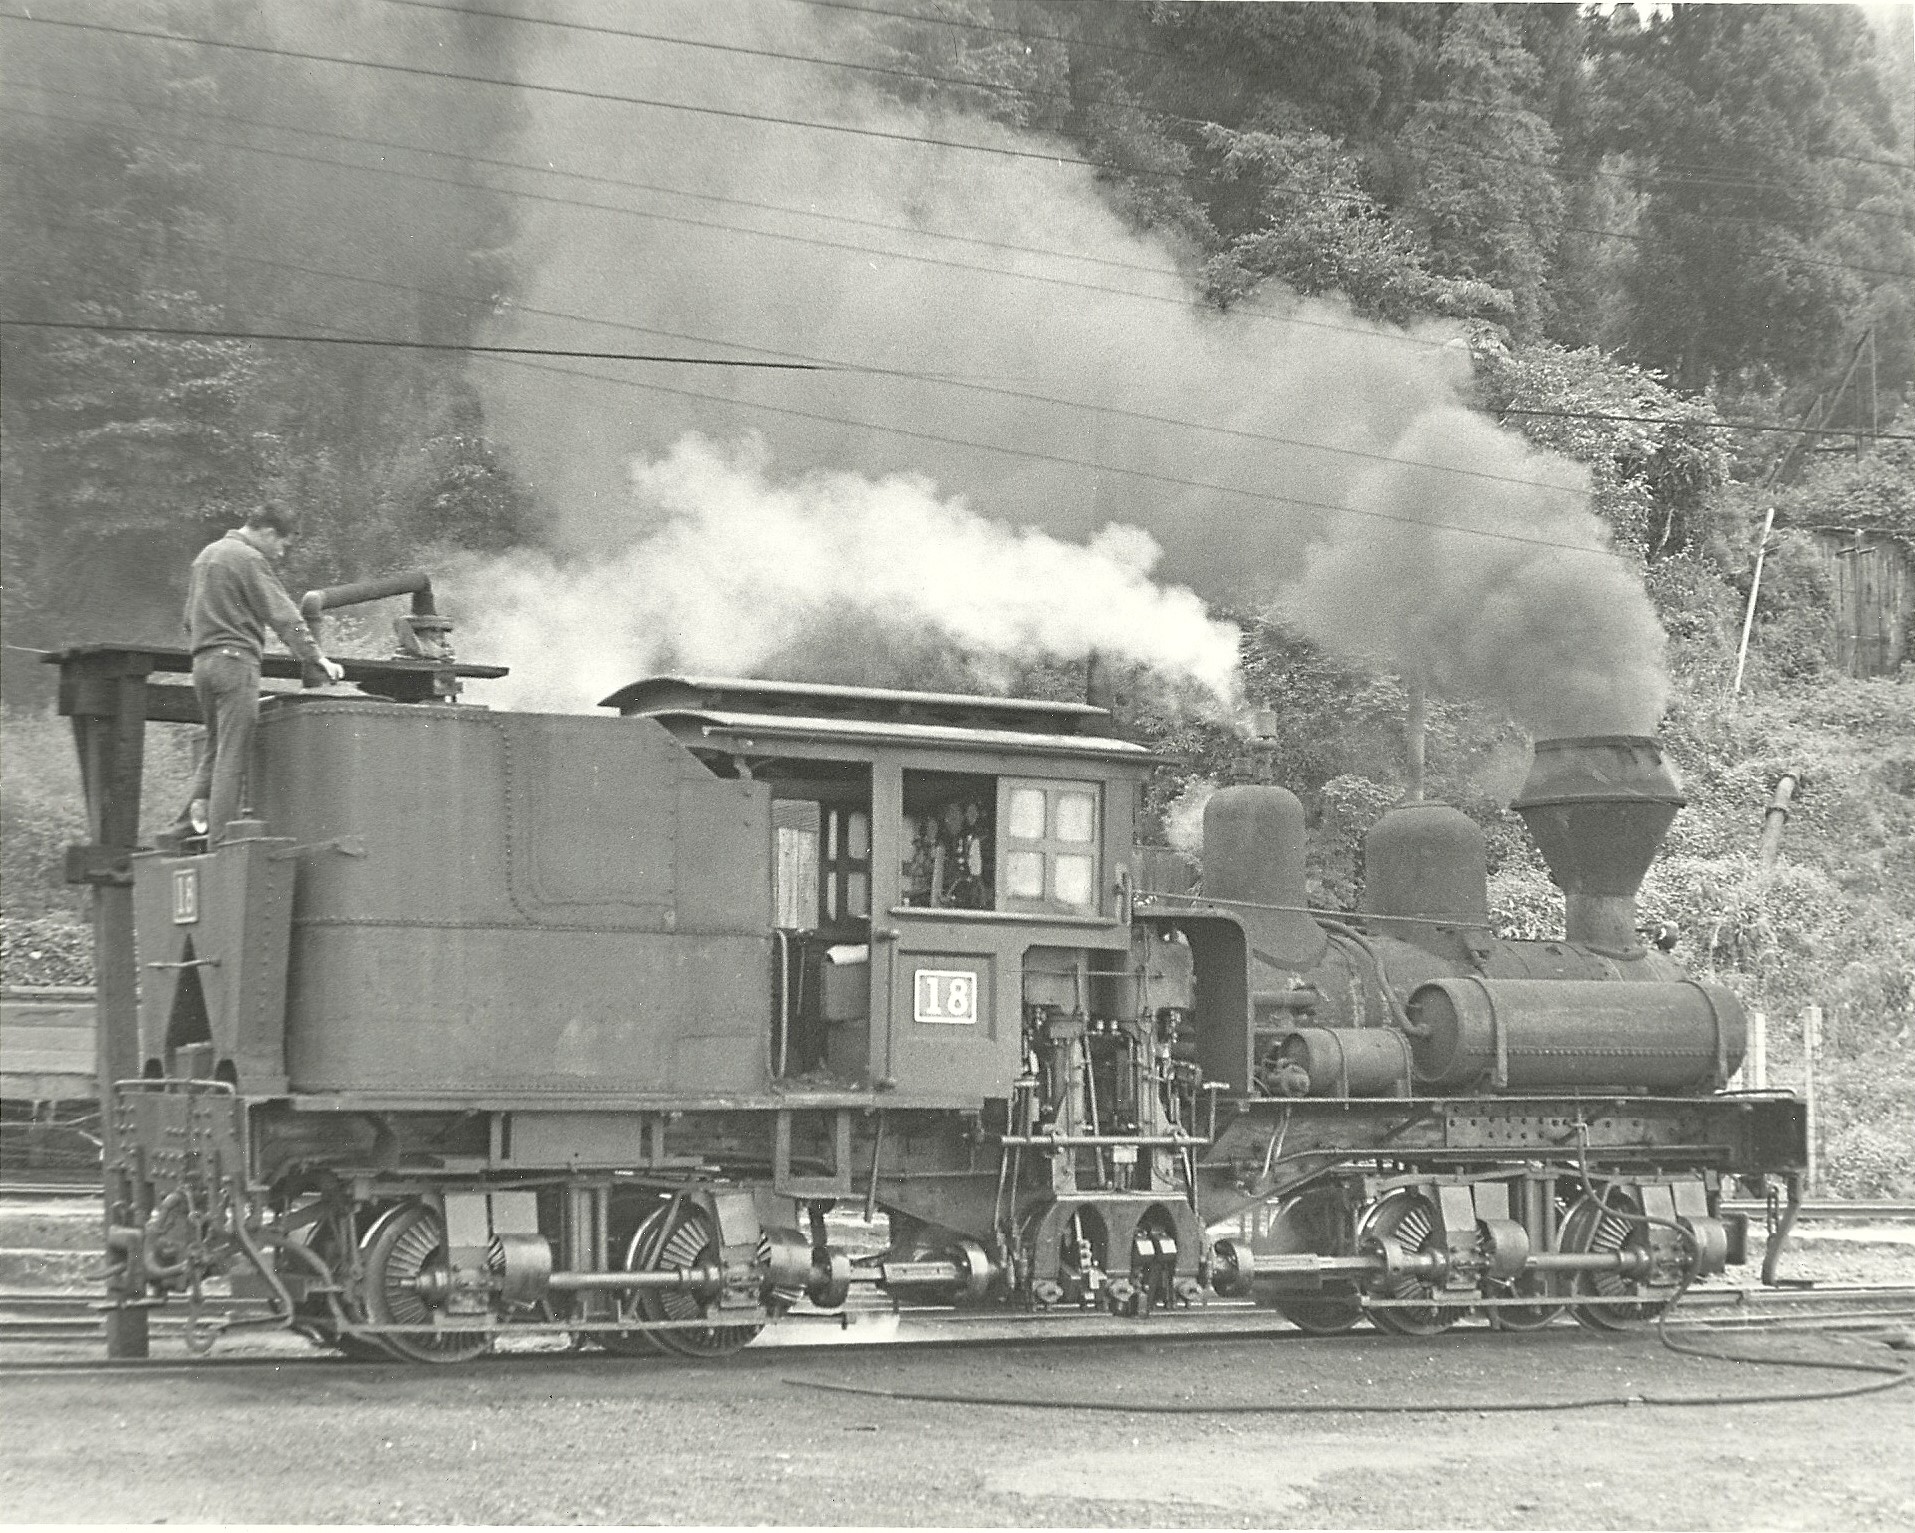 Re: The Alishan narrow gauge - Amazing spirals and shay locomotives